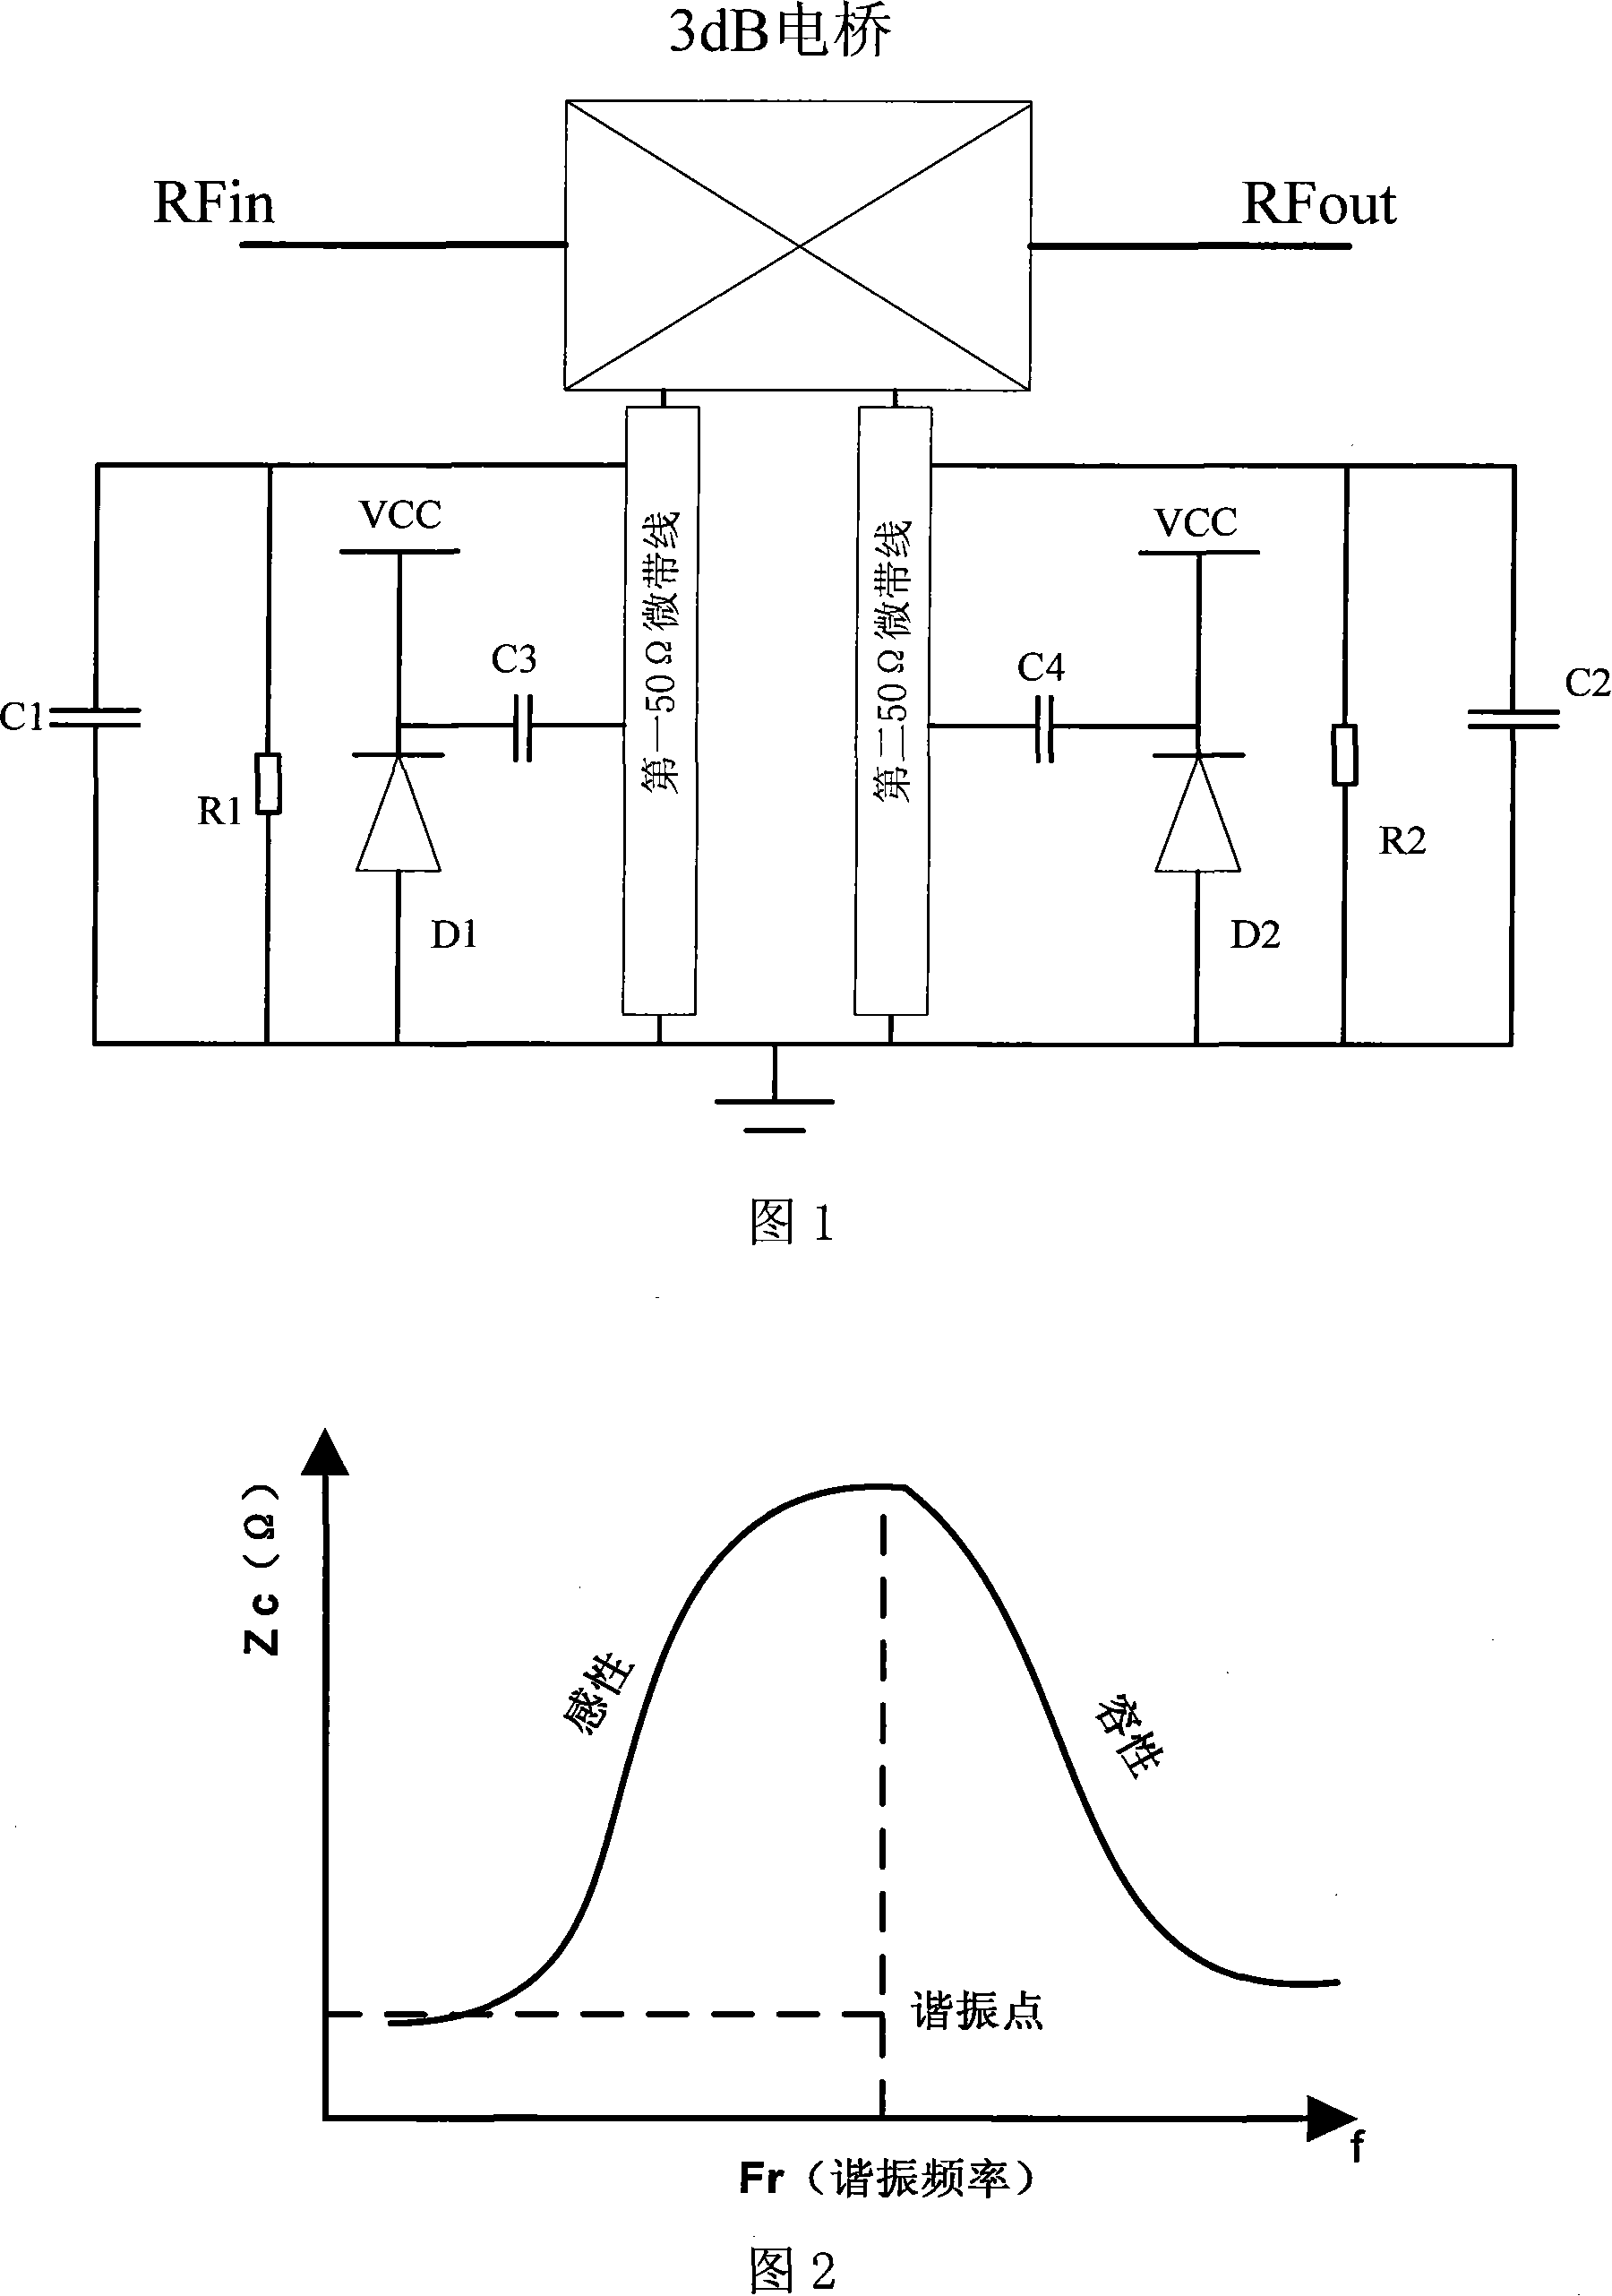 Gain fluctuation regulation circuit and method